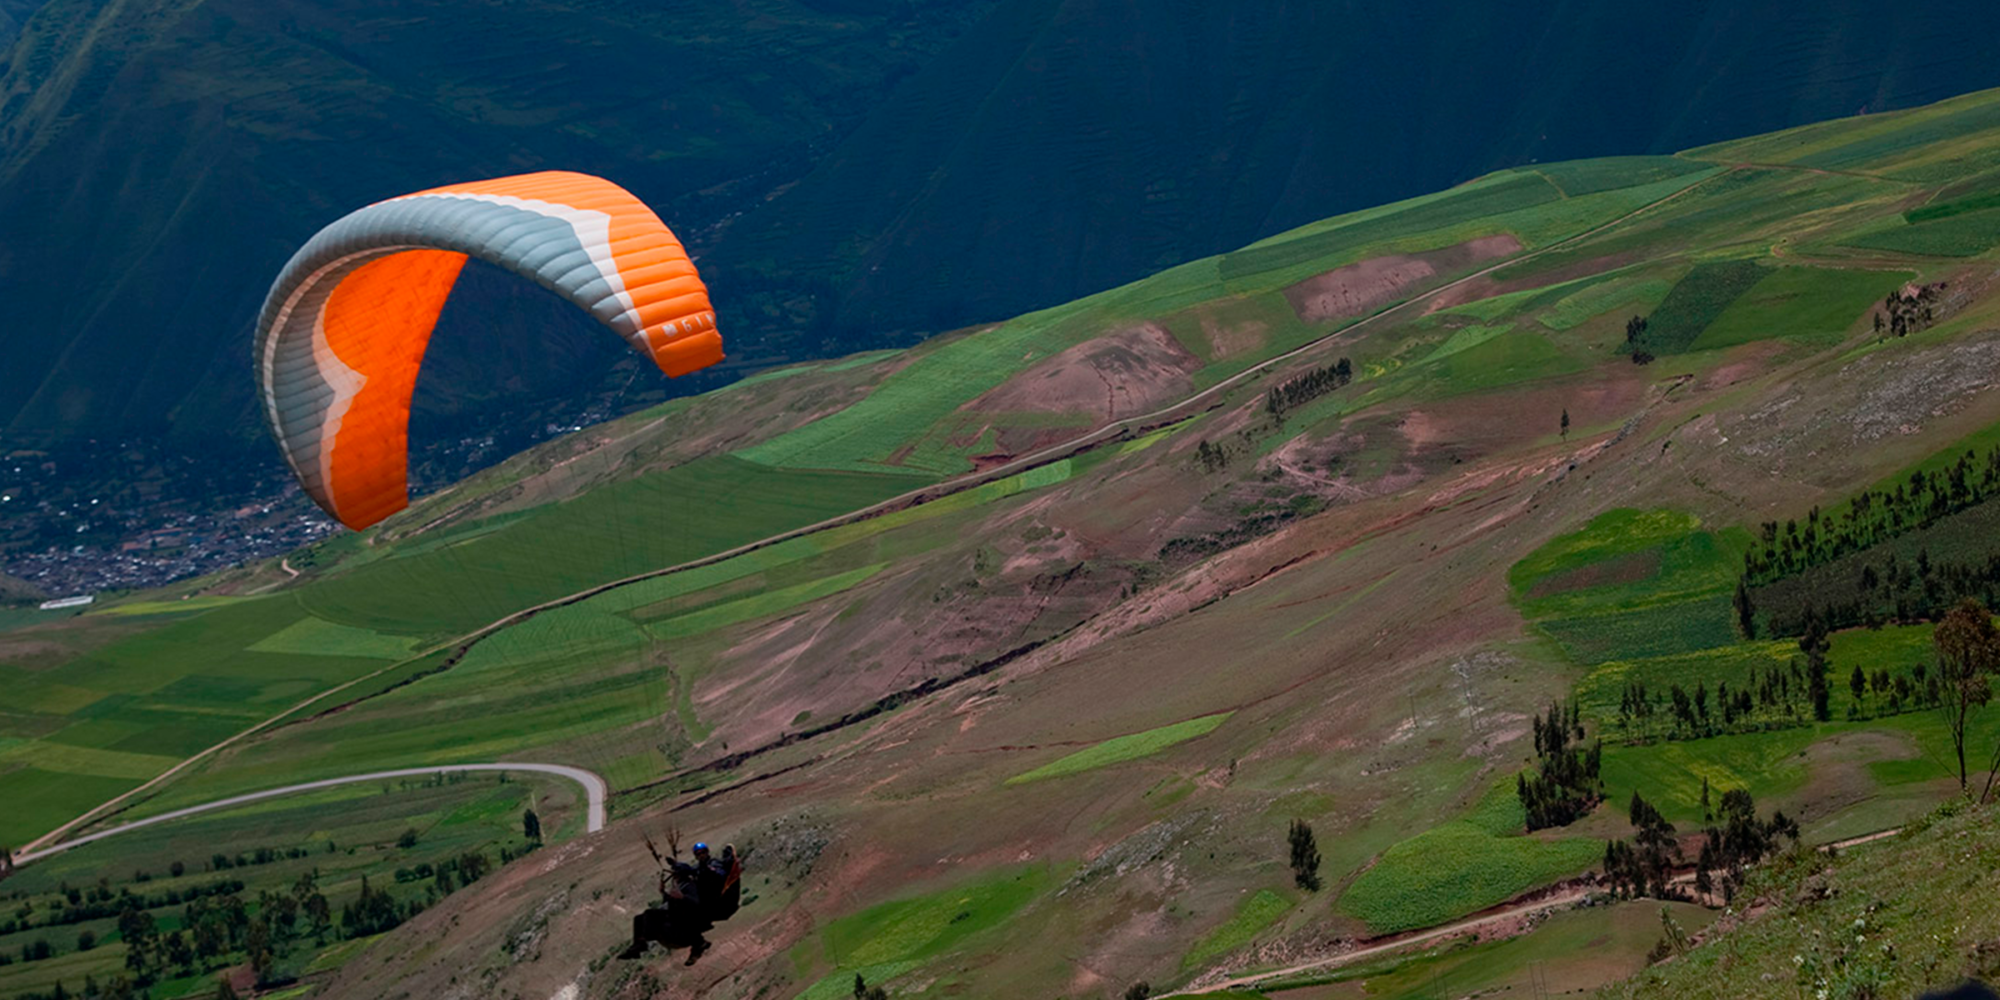 Paragliding in Sacred Valley